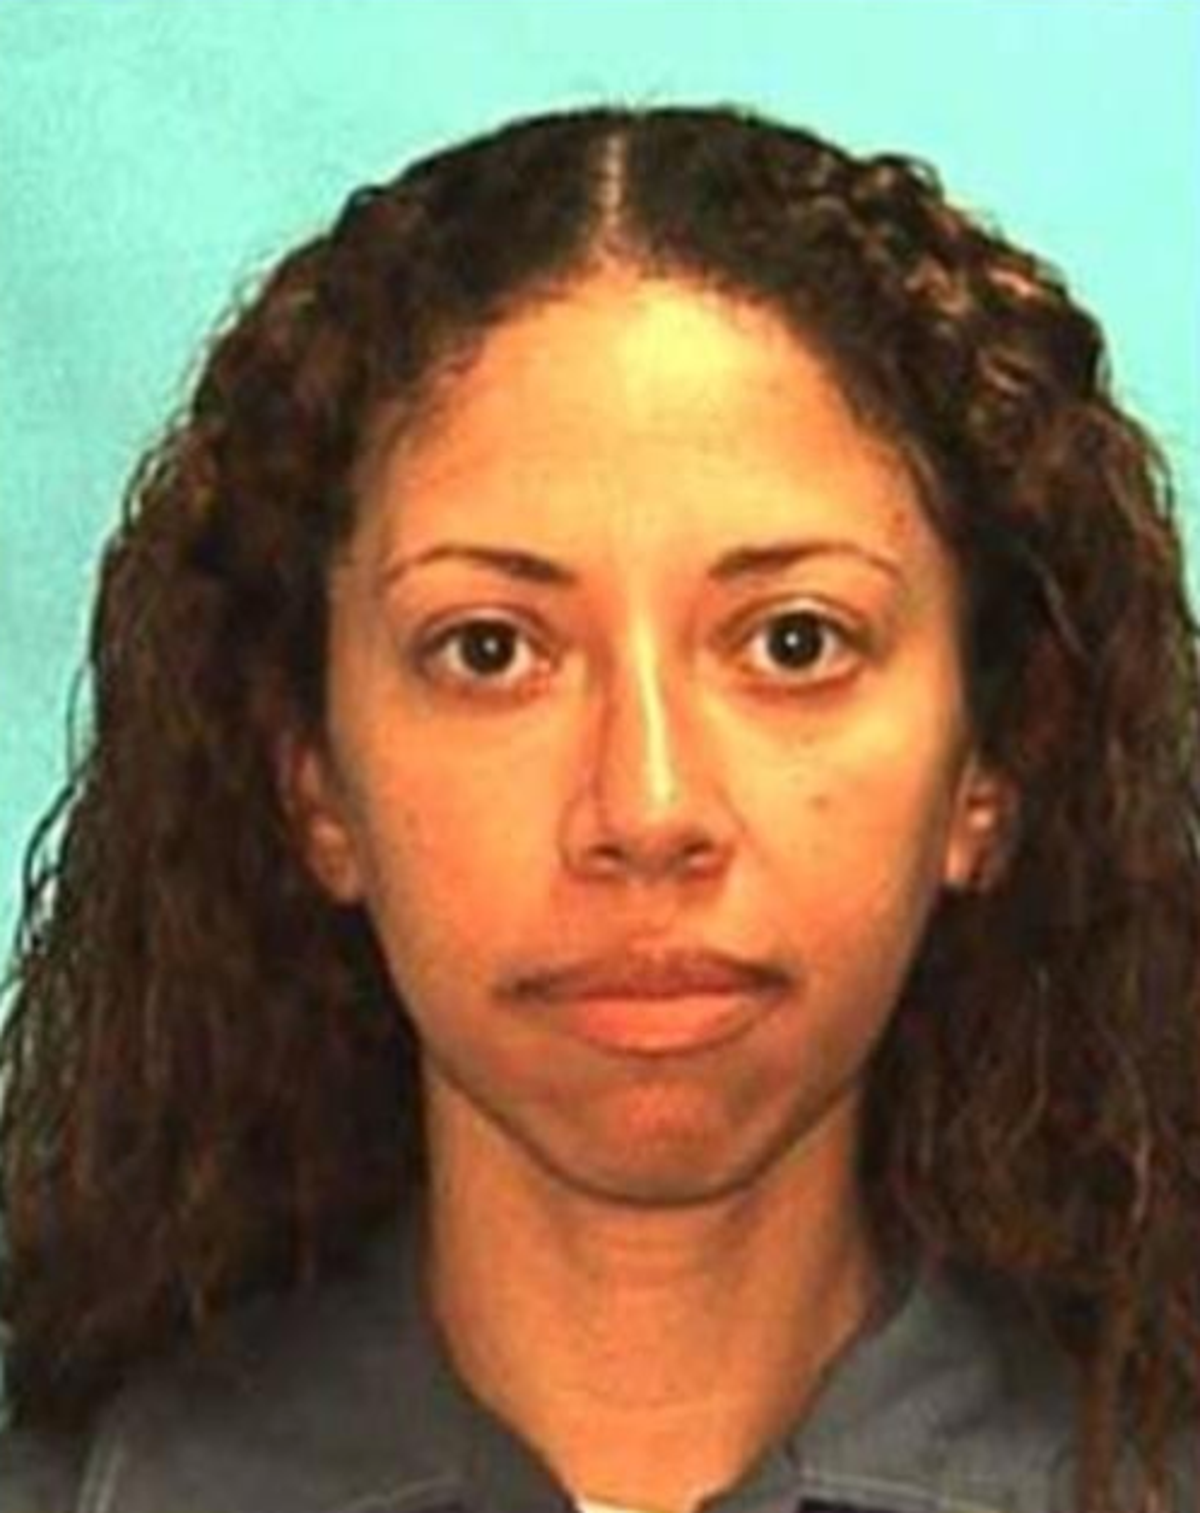 Lover-turned-informant of woman who plotted to kill husband is found dead